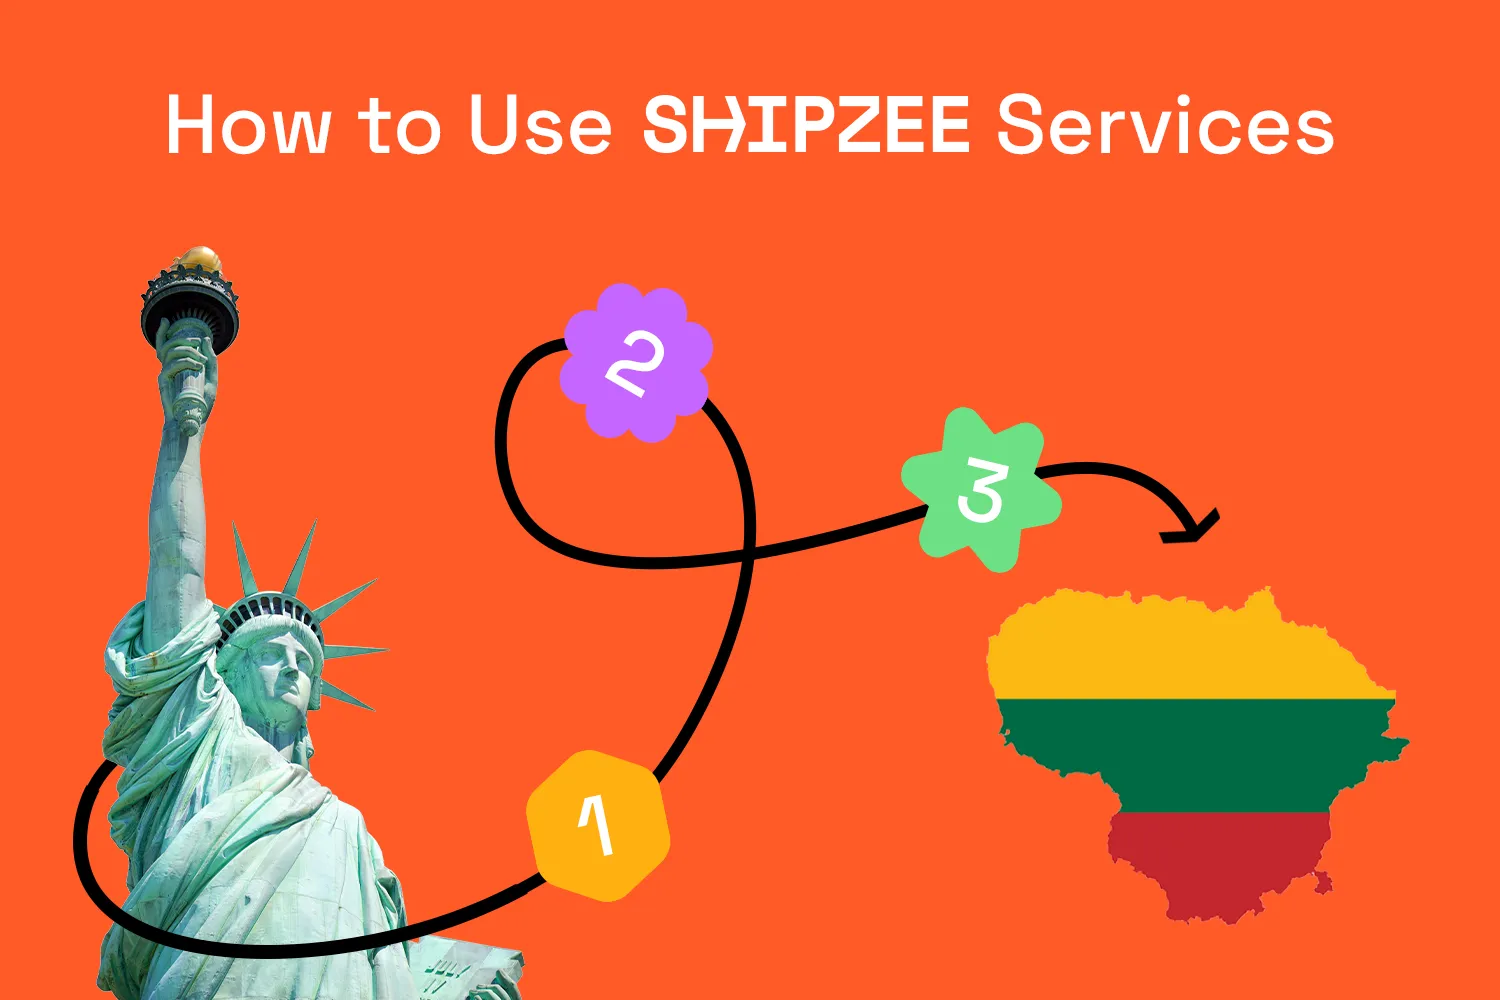 How to Use Shipzee Services